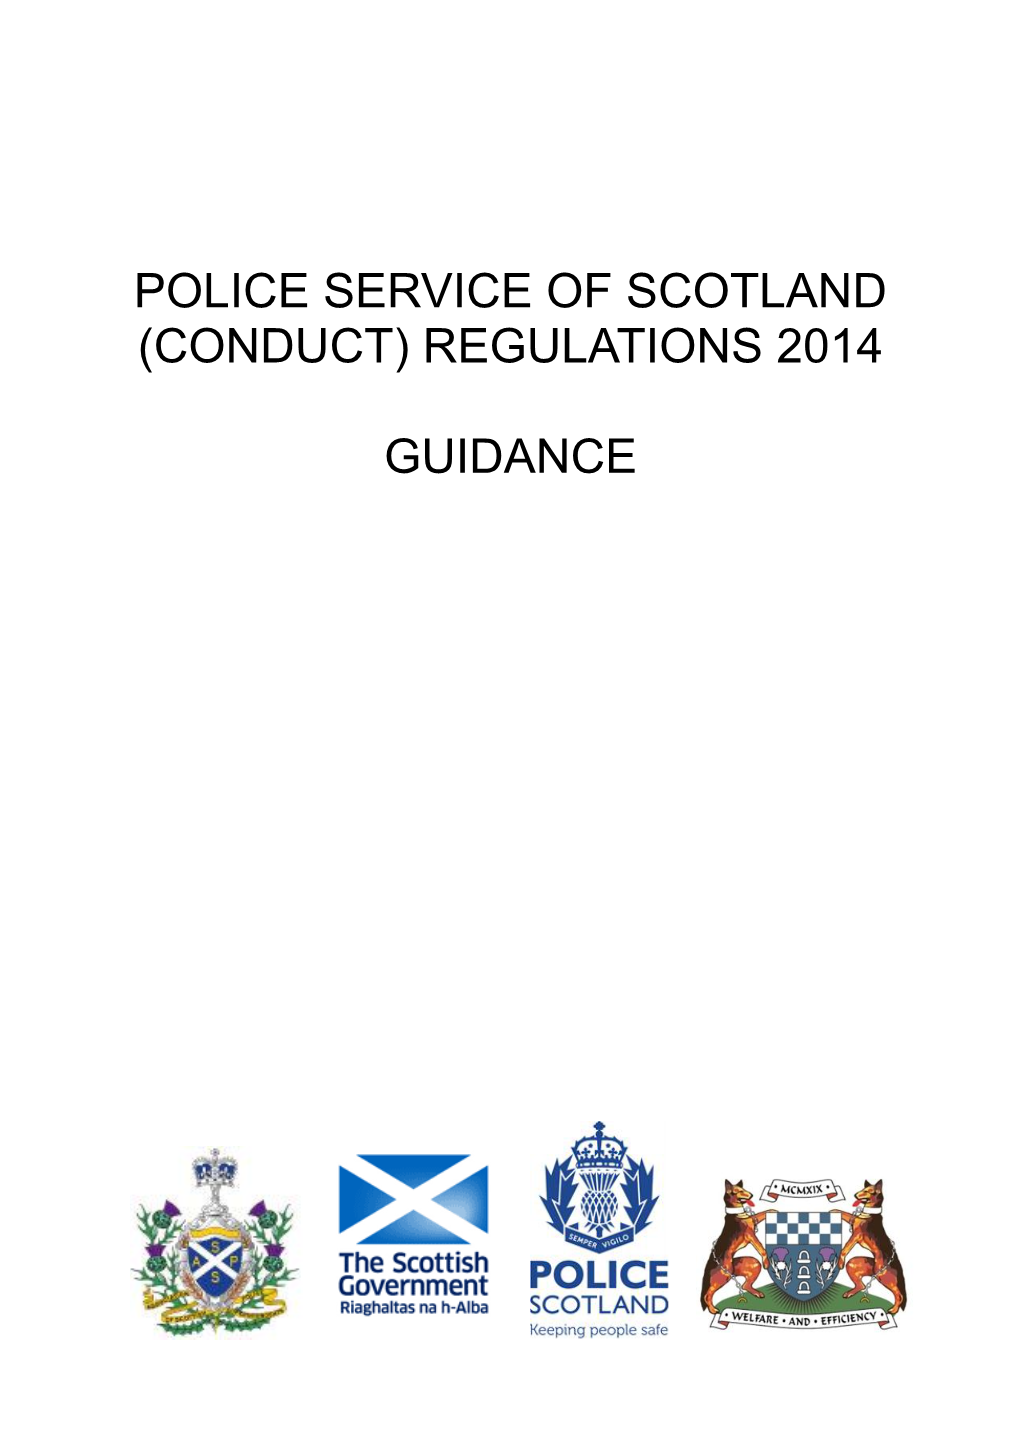 Police Service of Scotland (Conduct) Regulations 2014